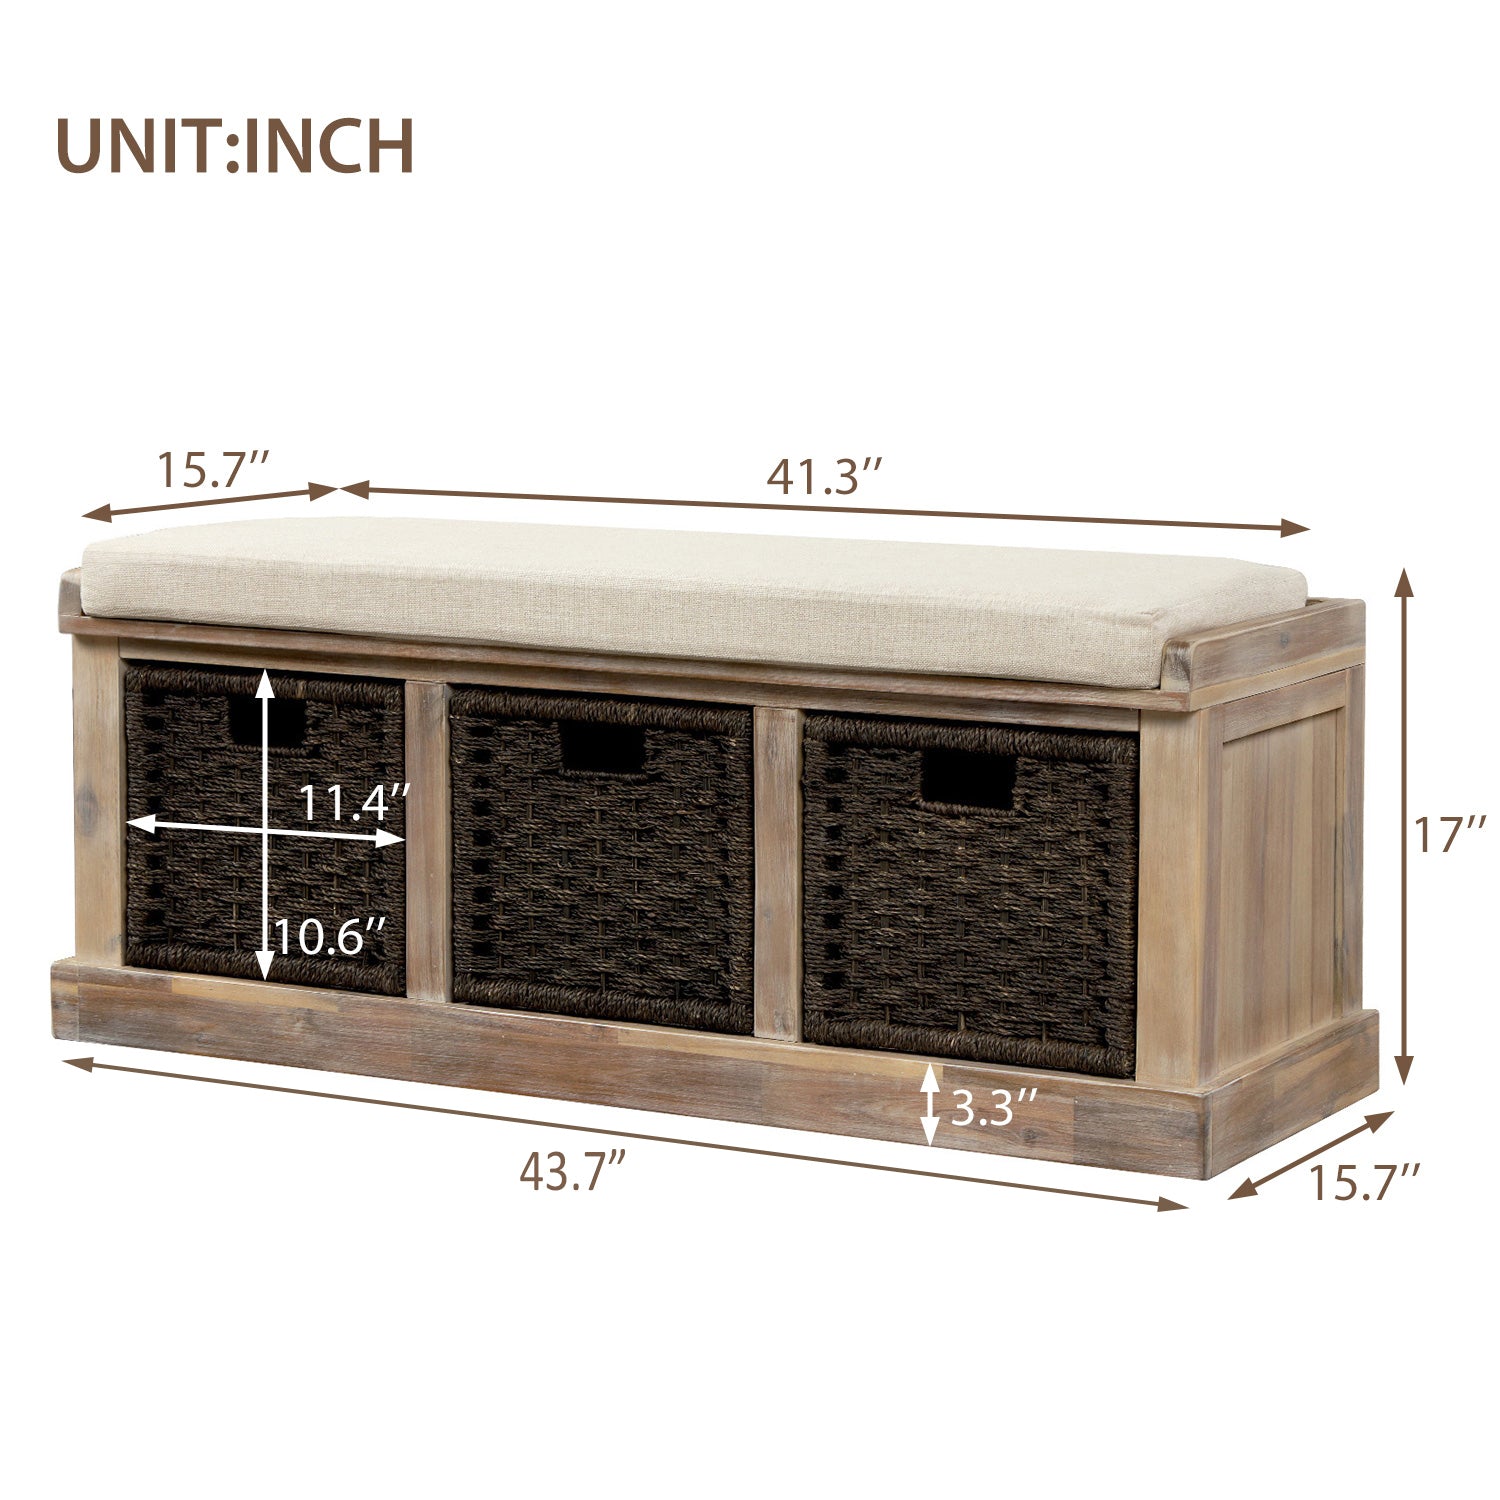 TREXM Country Storage Bench with 3 Detachable Classic Rattan Baskets (Tan)